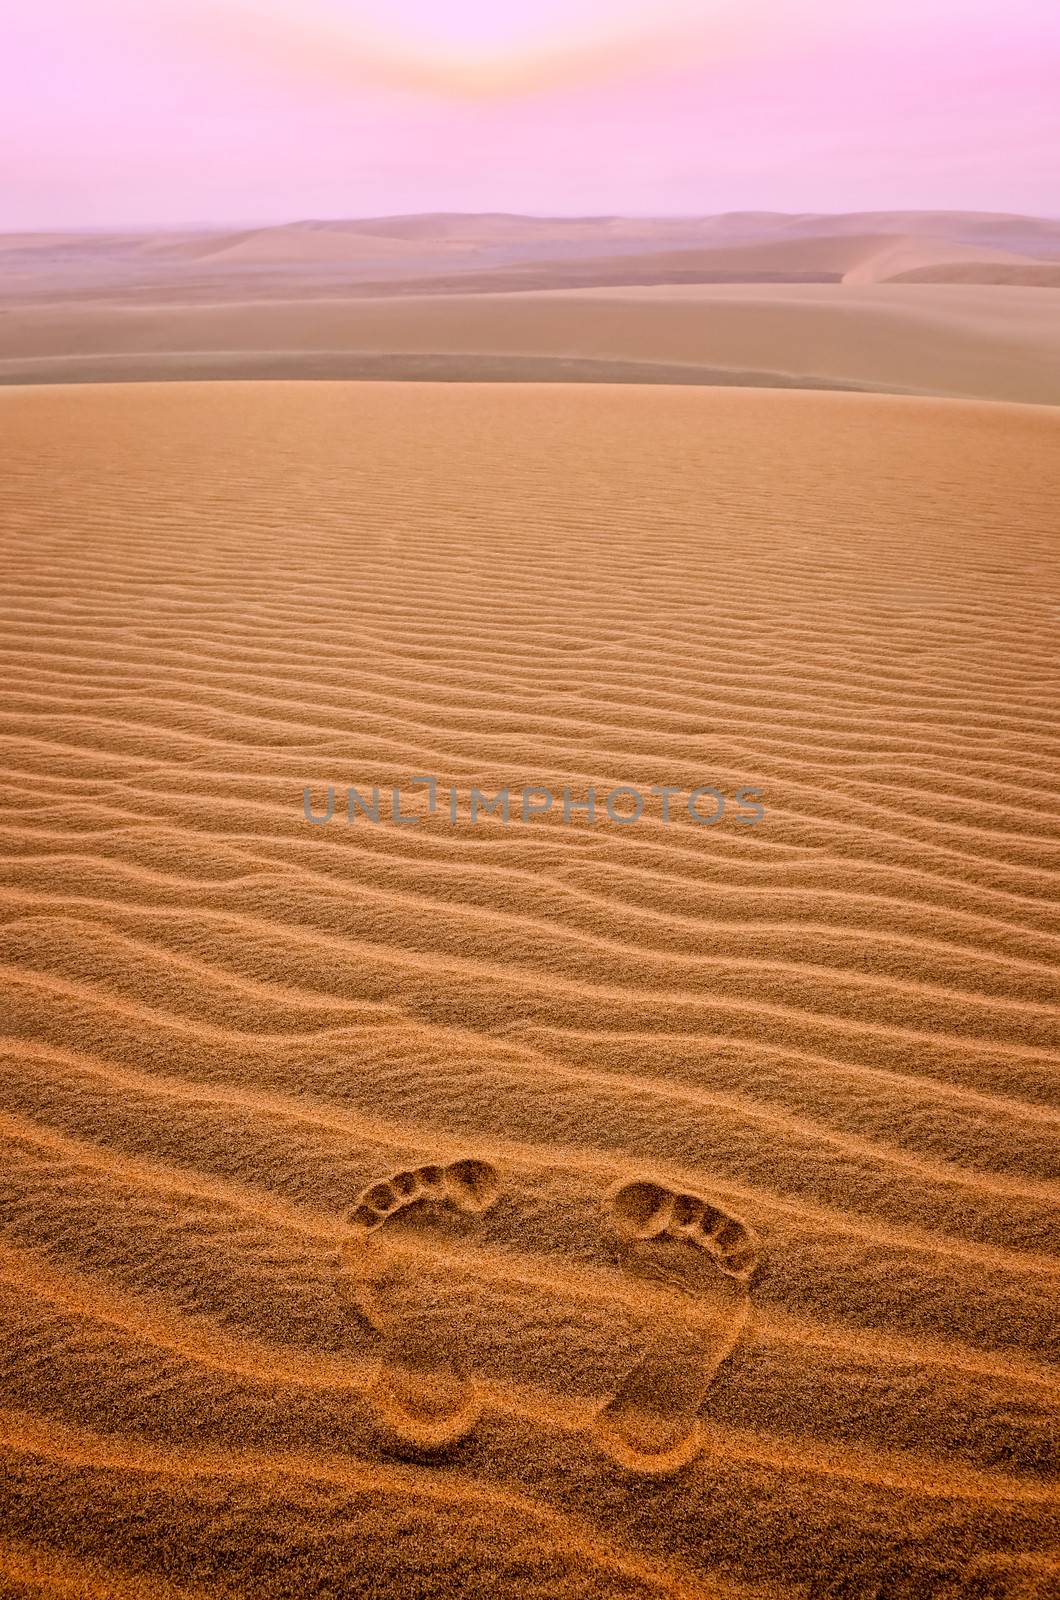 Two footprints in sand in the desert at sunset